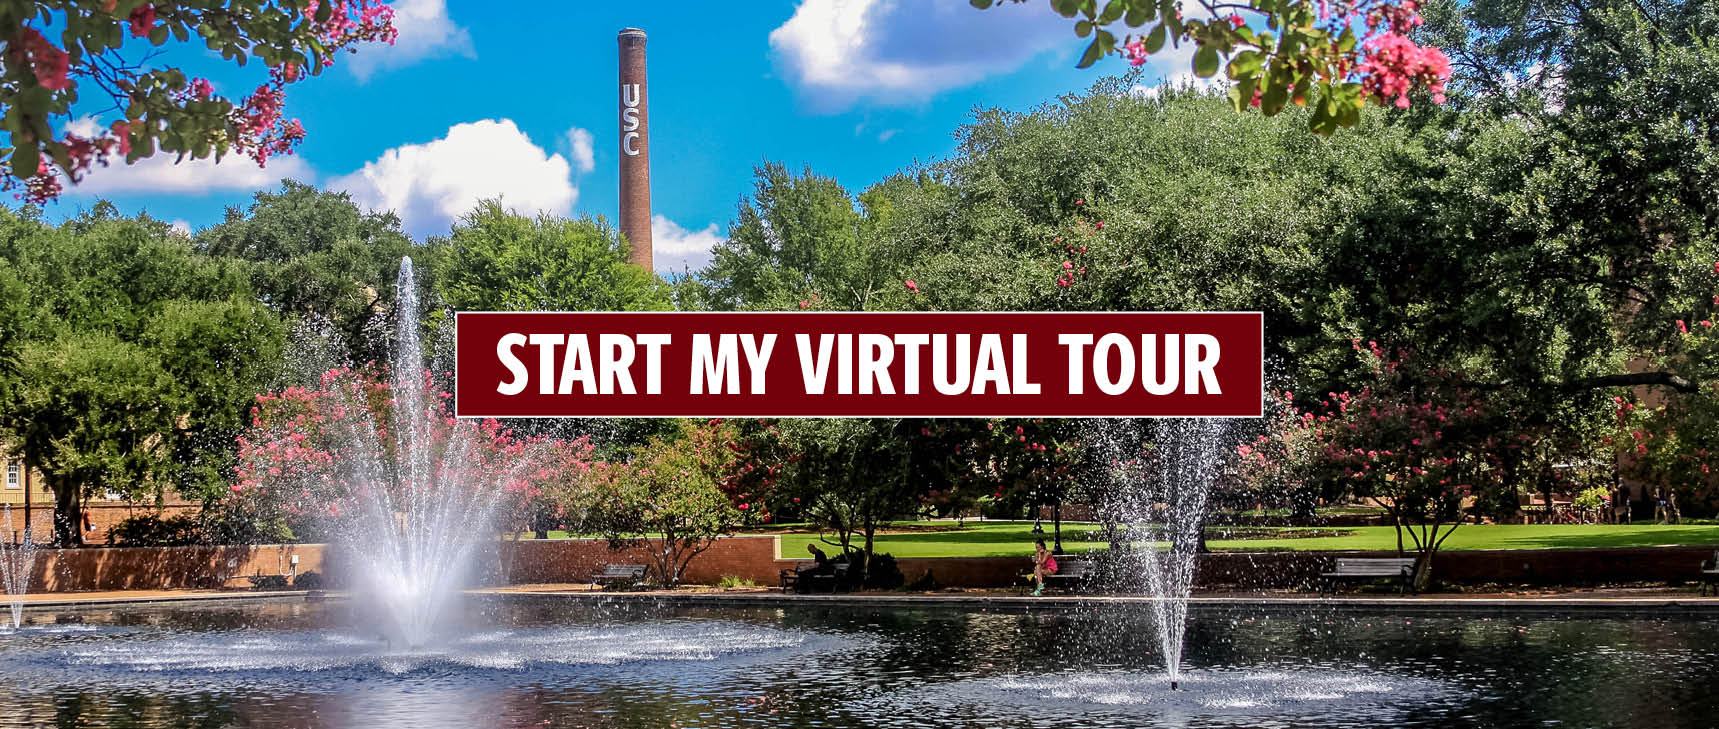 Picture of USC campus with overlaid stamp stating "Start my virtual tour"